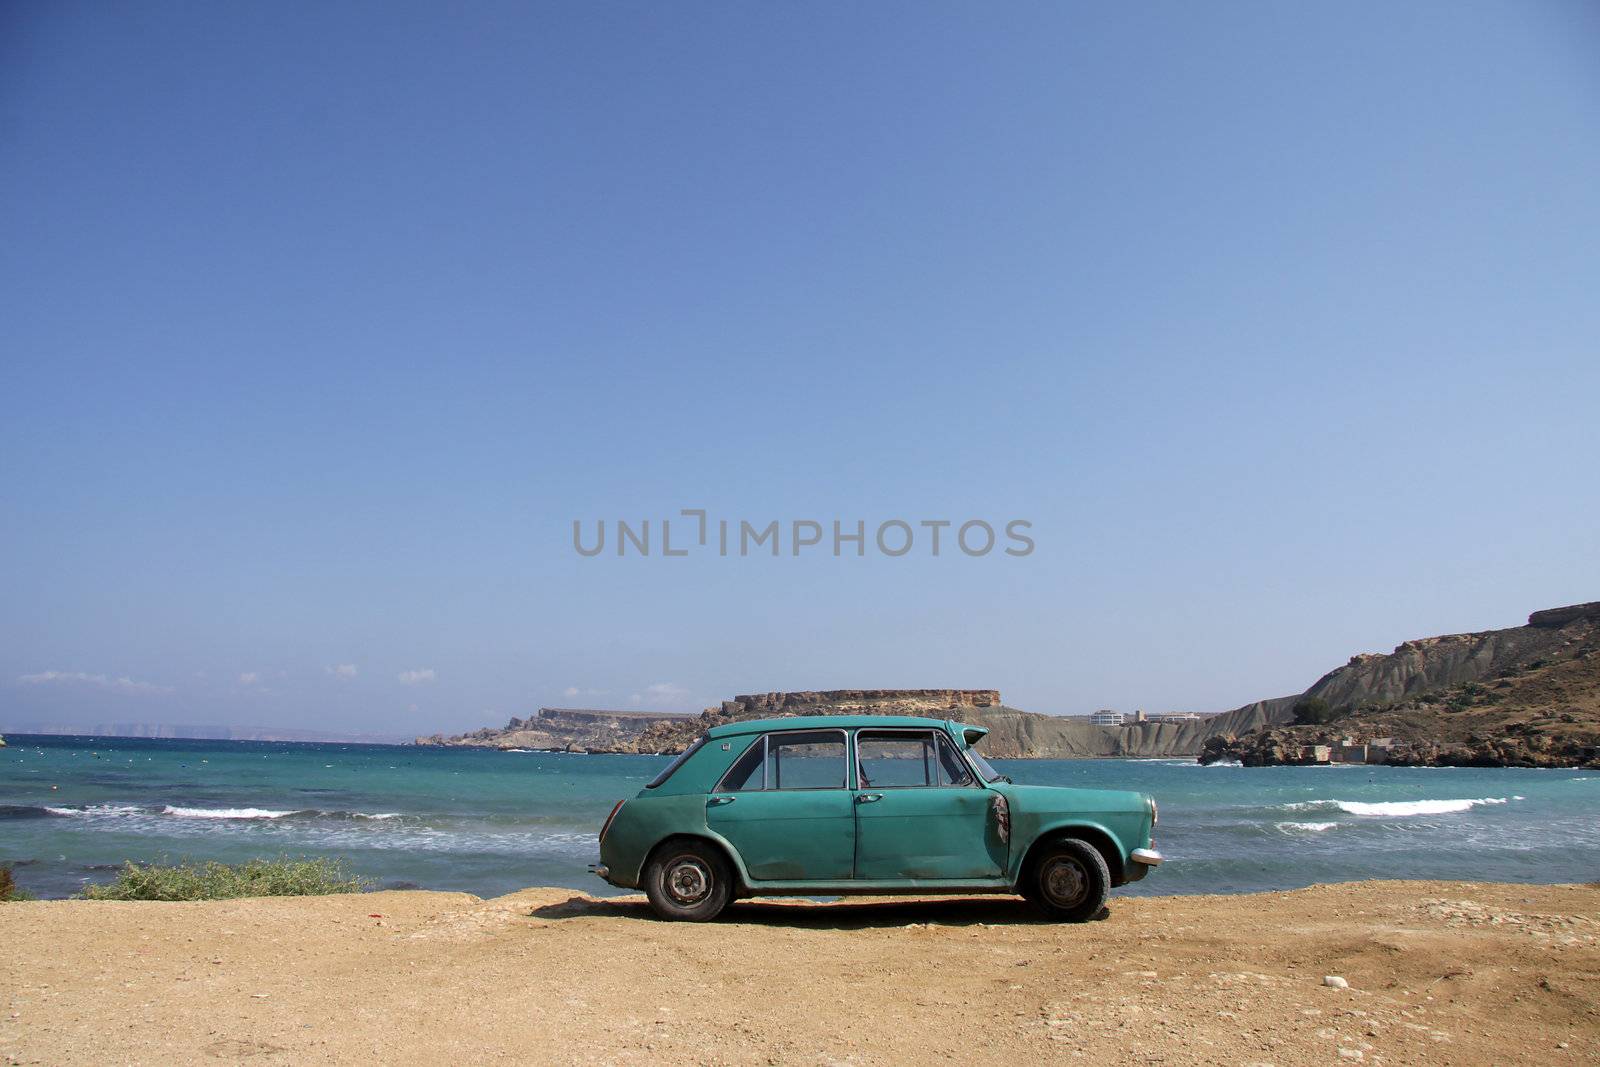 An old green rusty Austin is parked on a scenic beautiful beach